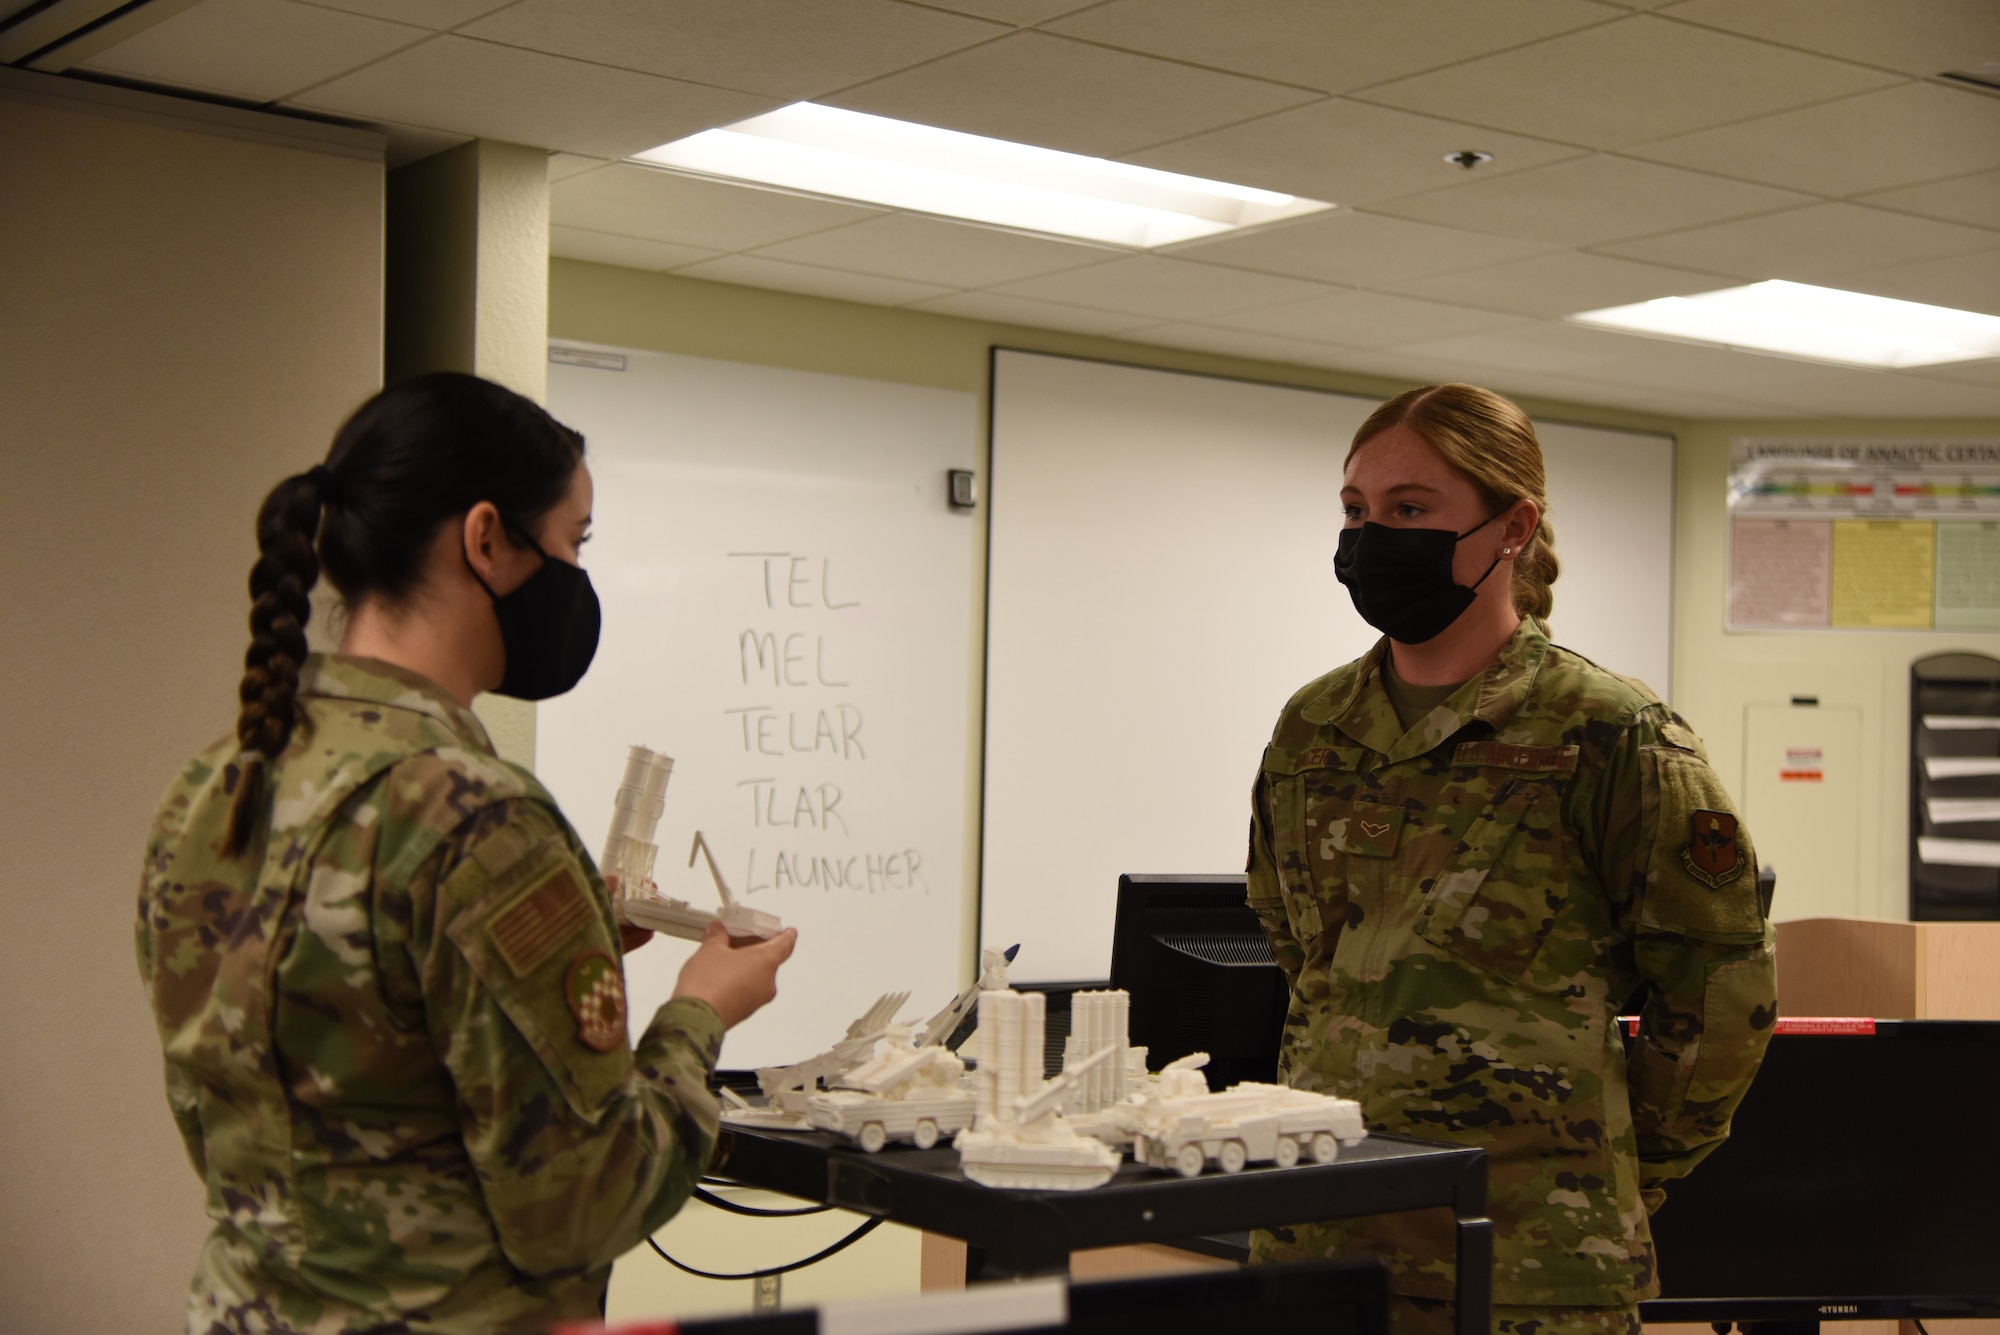 U.S. Air Force Tech. Sgt. Mollie Whitley, 315th Training Squadron instructor, quizzes Airman Mauranda Racer, 315th TRS student on her knowledge of different types of equipment. The instructors provided these models to help the students transition from power points to hands on learning. (U.S. Air Force photo by Senior Airman Ashley Thrash)